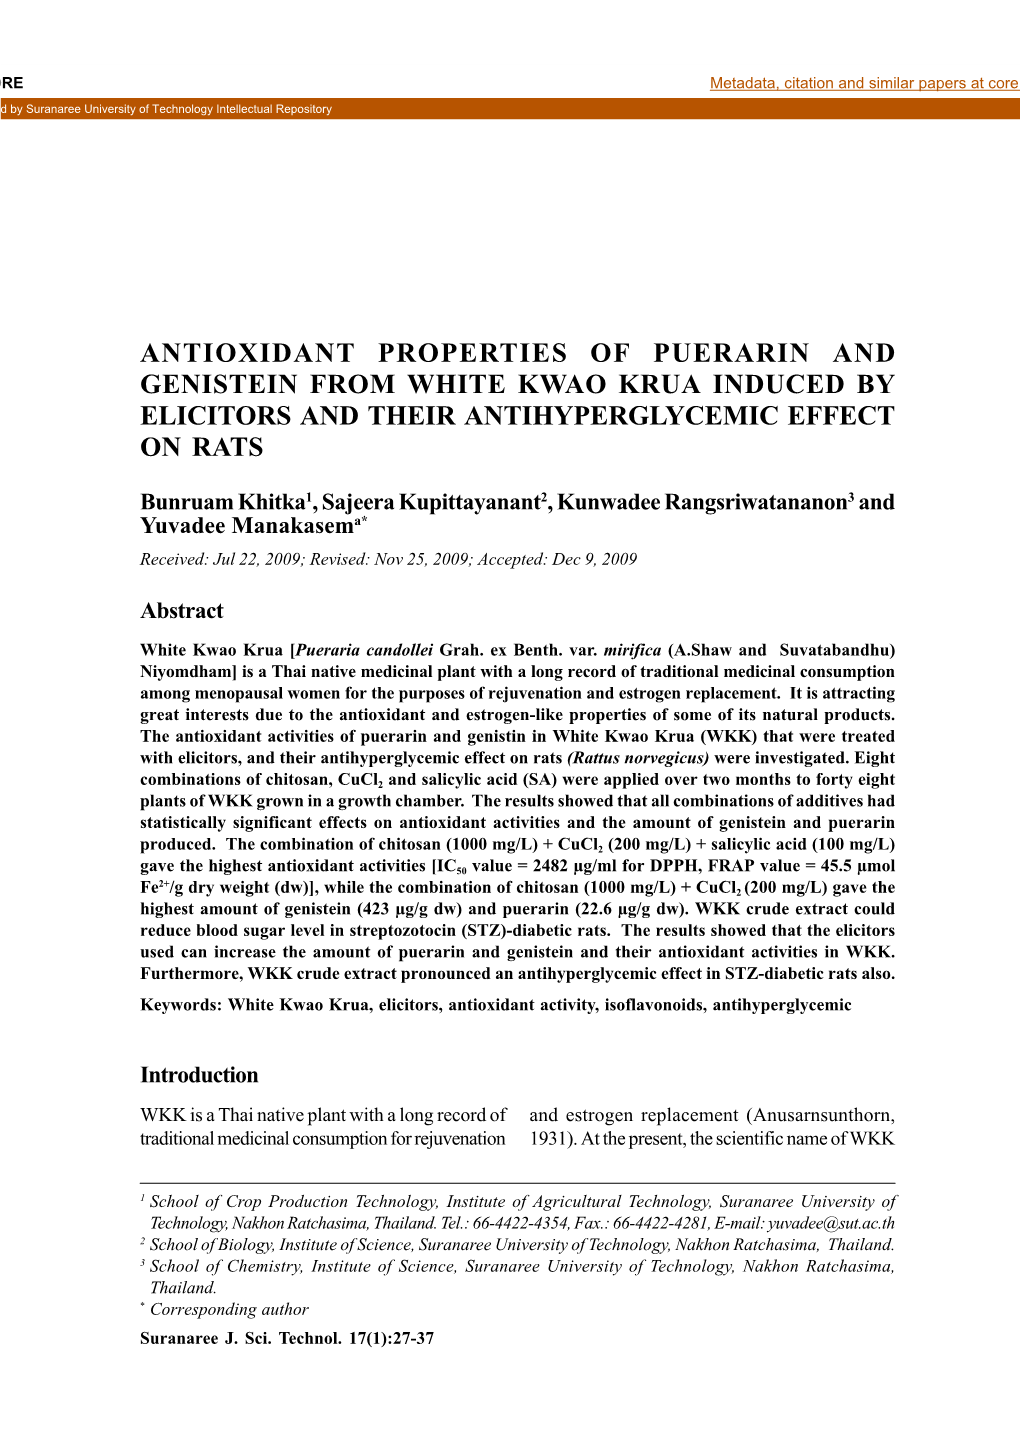 Antioxidant Properties of Puerarin and Genistein from White Kwao Krua Induced by Elicitors and Their Antihyperglycemic Effect on Rats